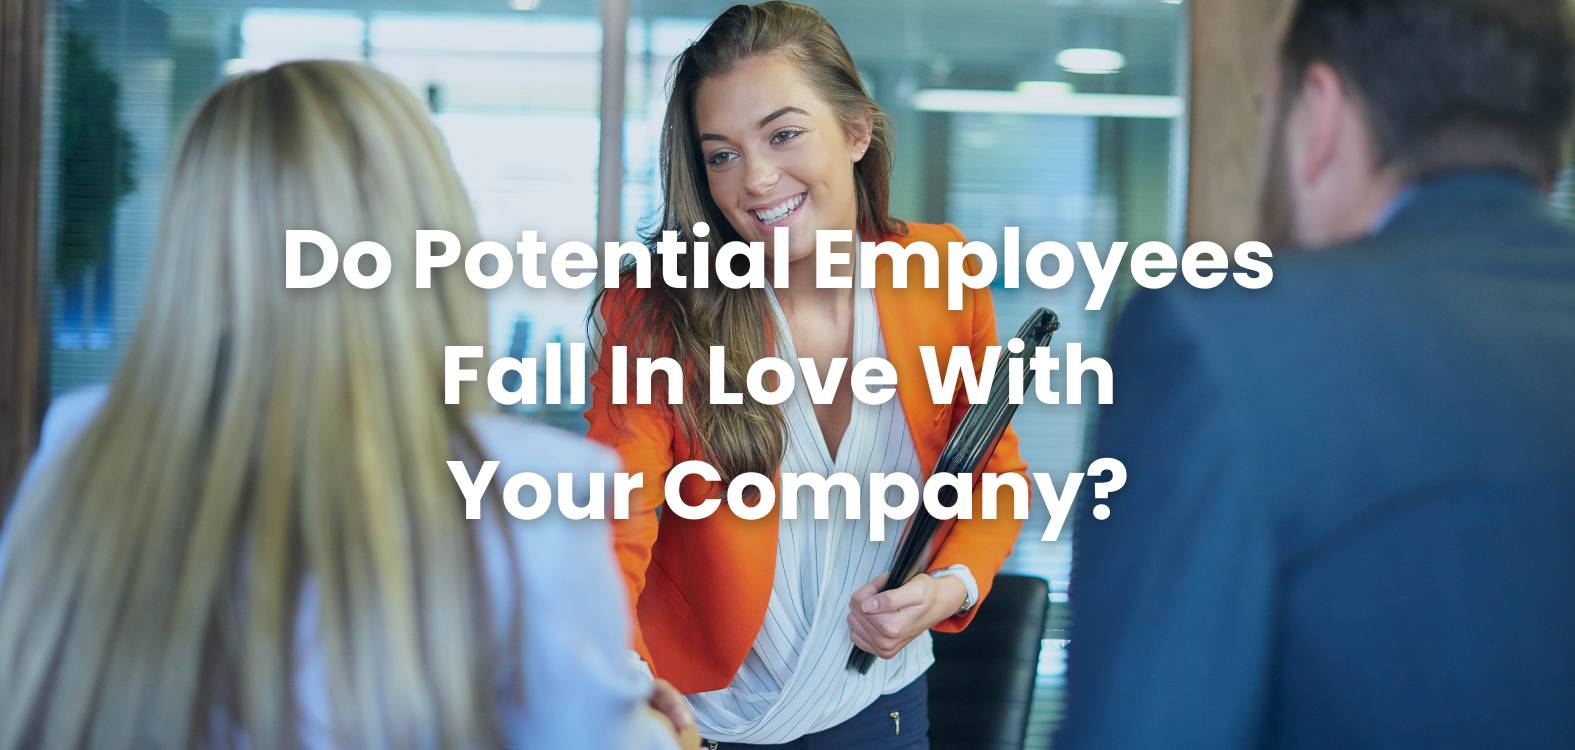 Do Potential Employees Fall In Love With Your Company